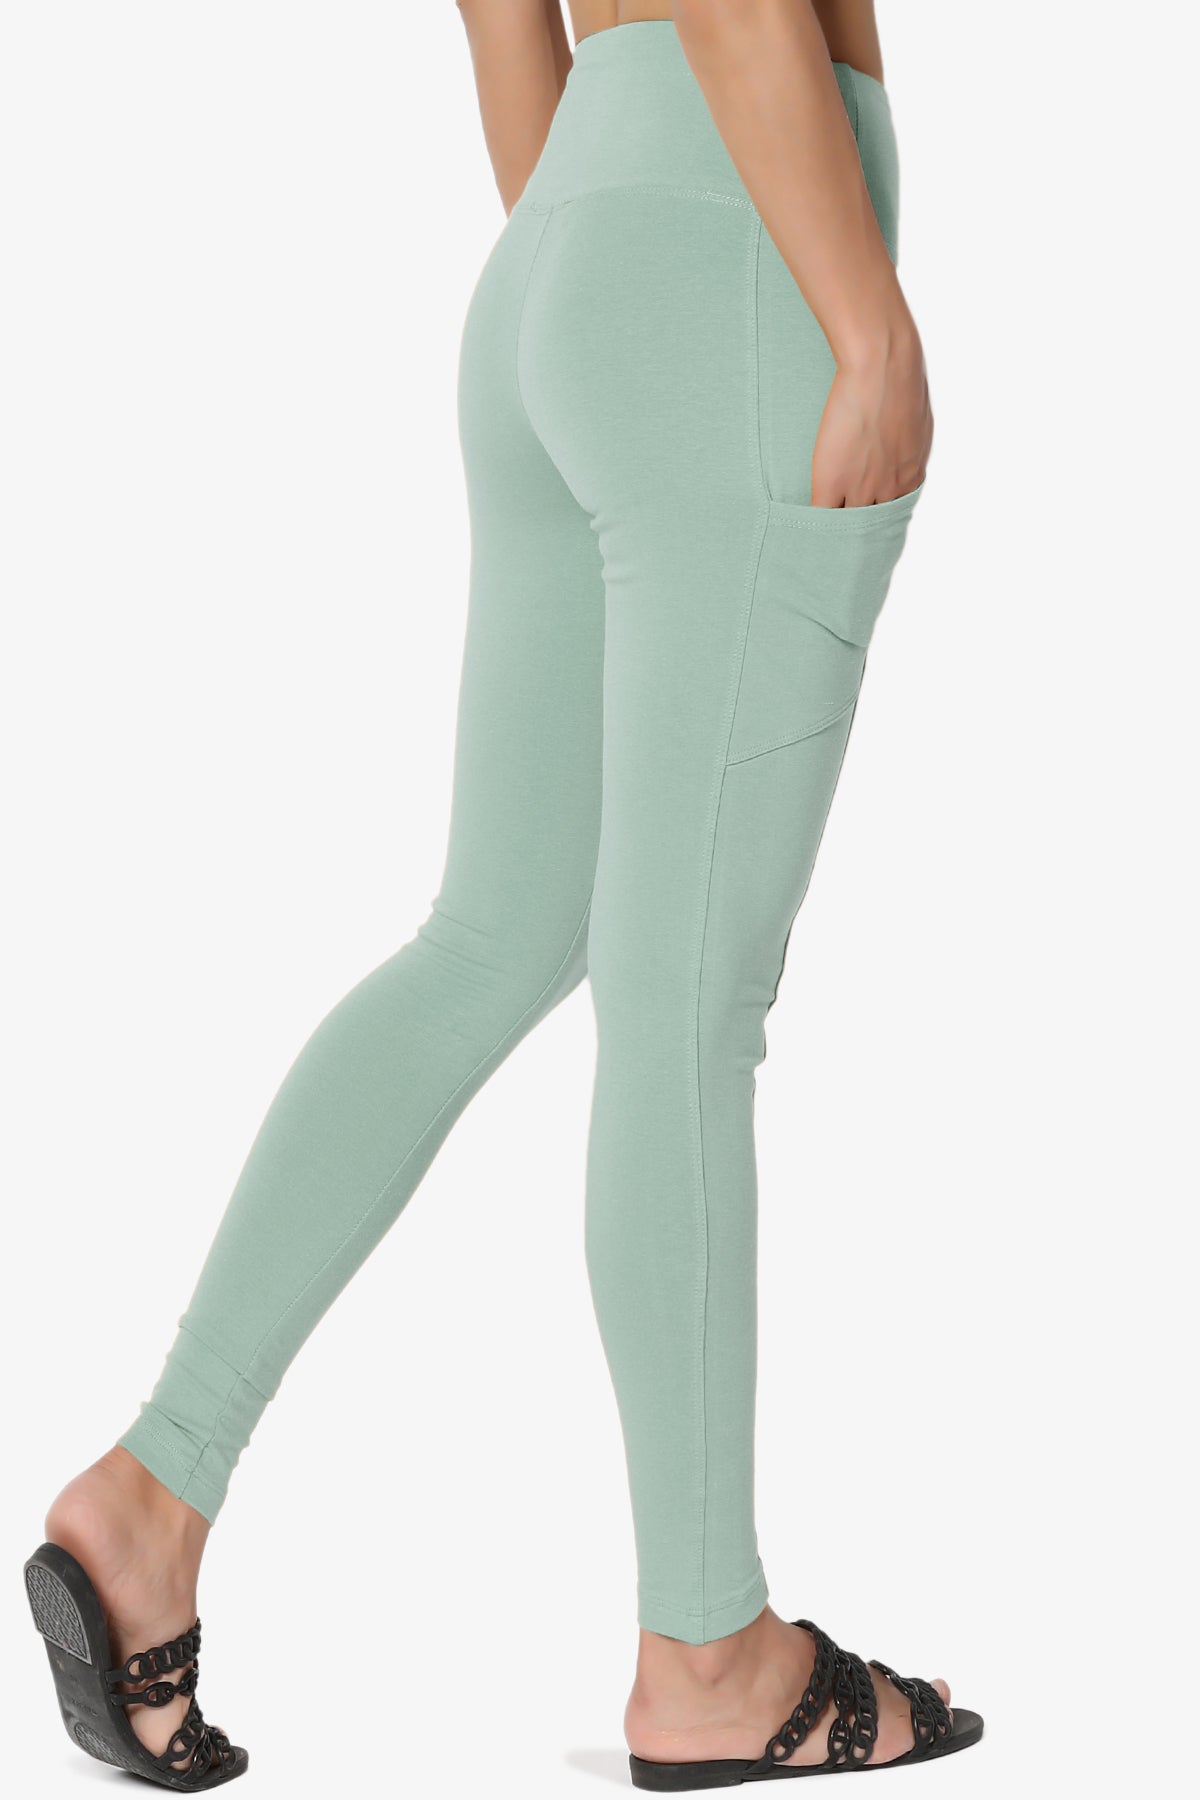 Ansley Luxe Cotton Leggings with Pockets LIGHT GREEN_4